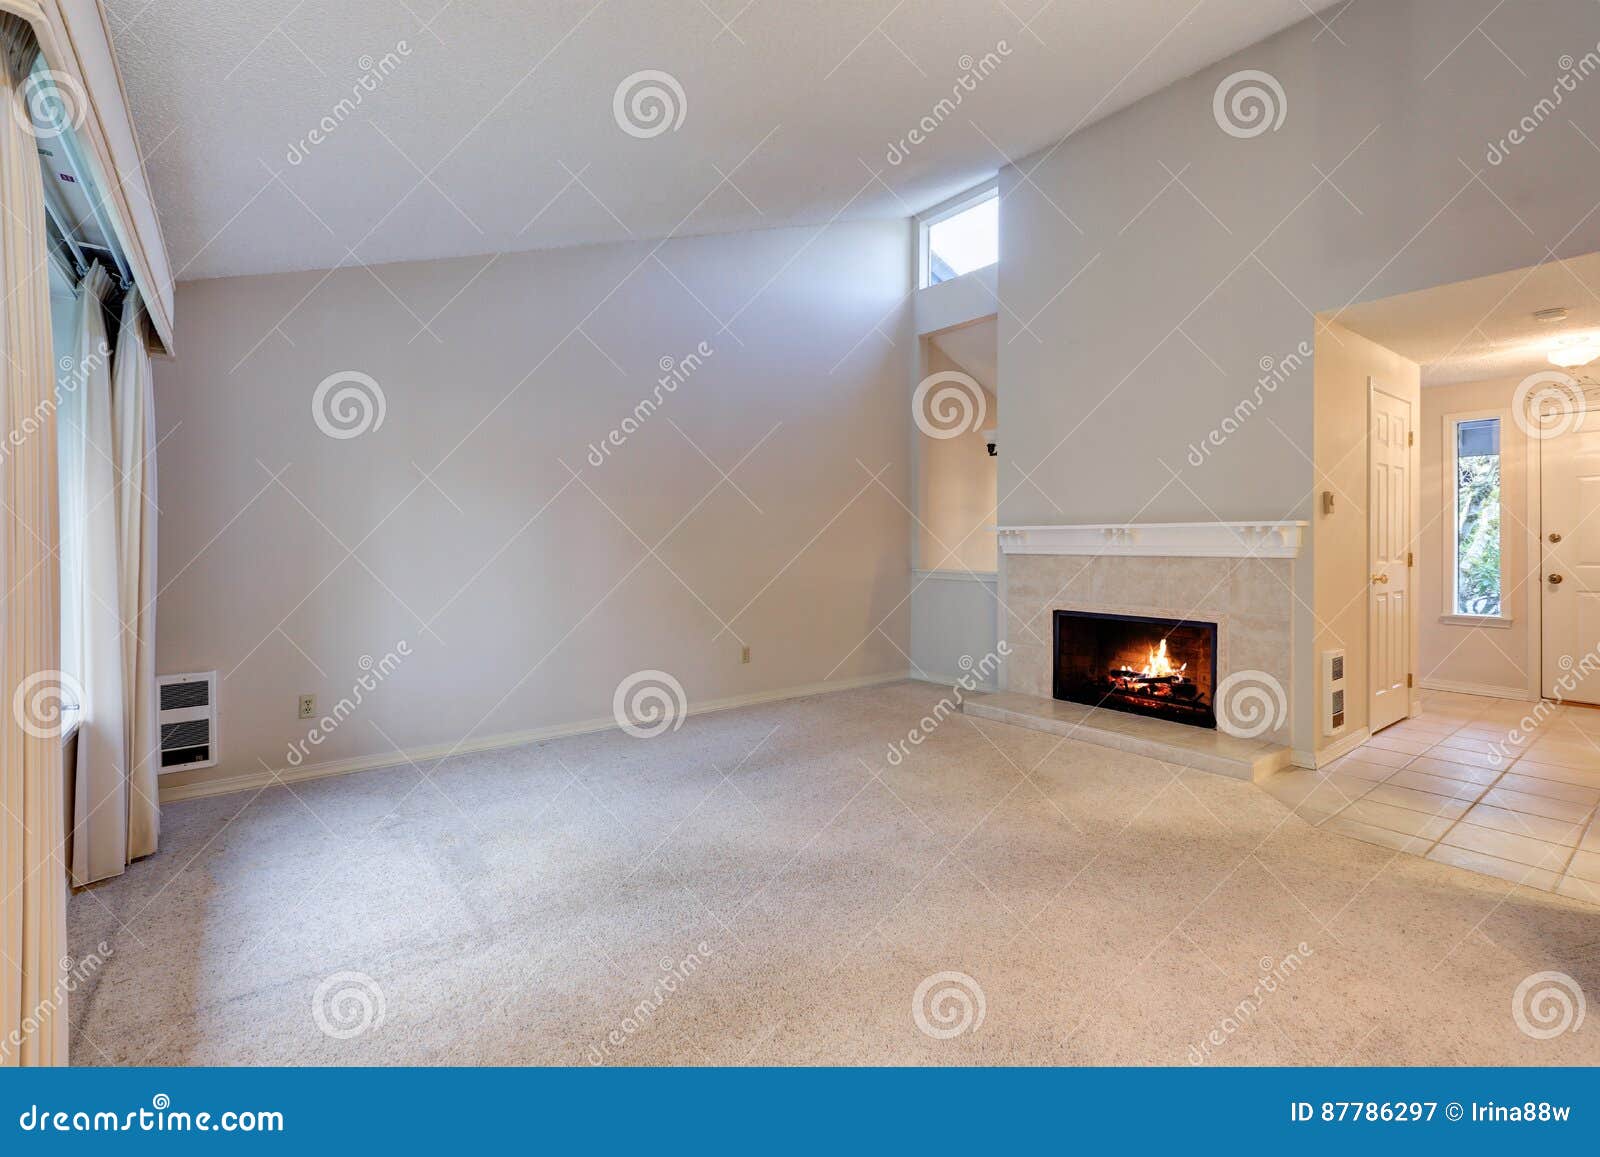 Empty Living Space With Vaulted Ceiling And Grey Walls Stock Image